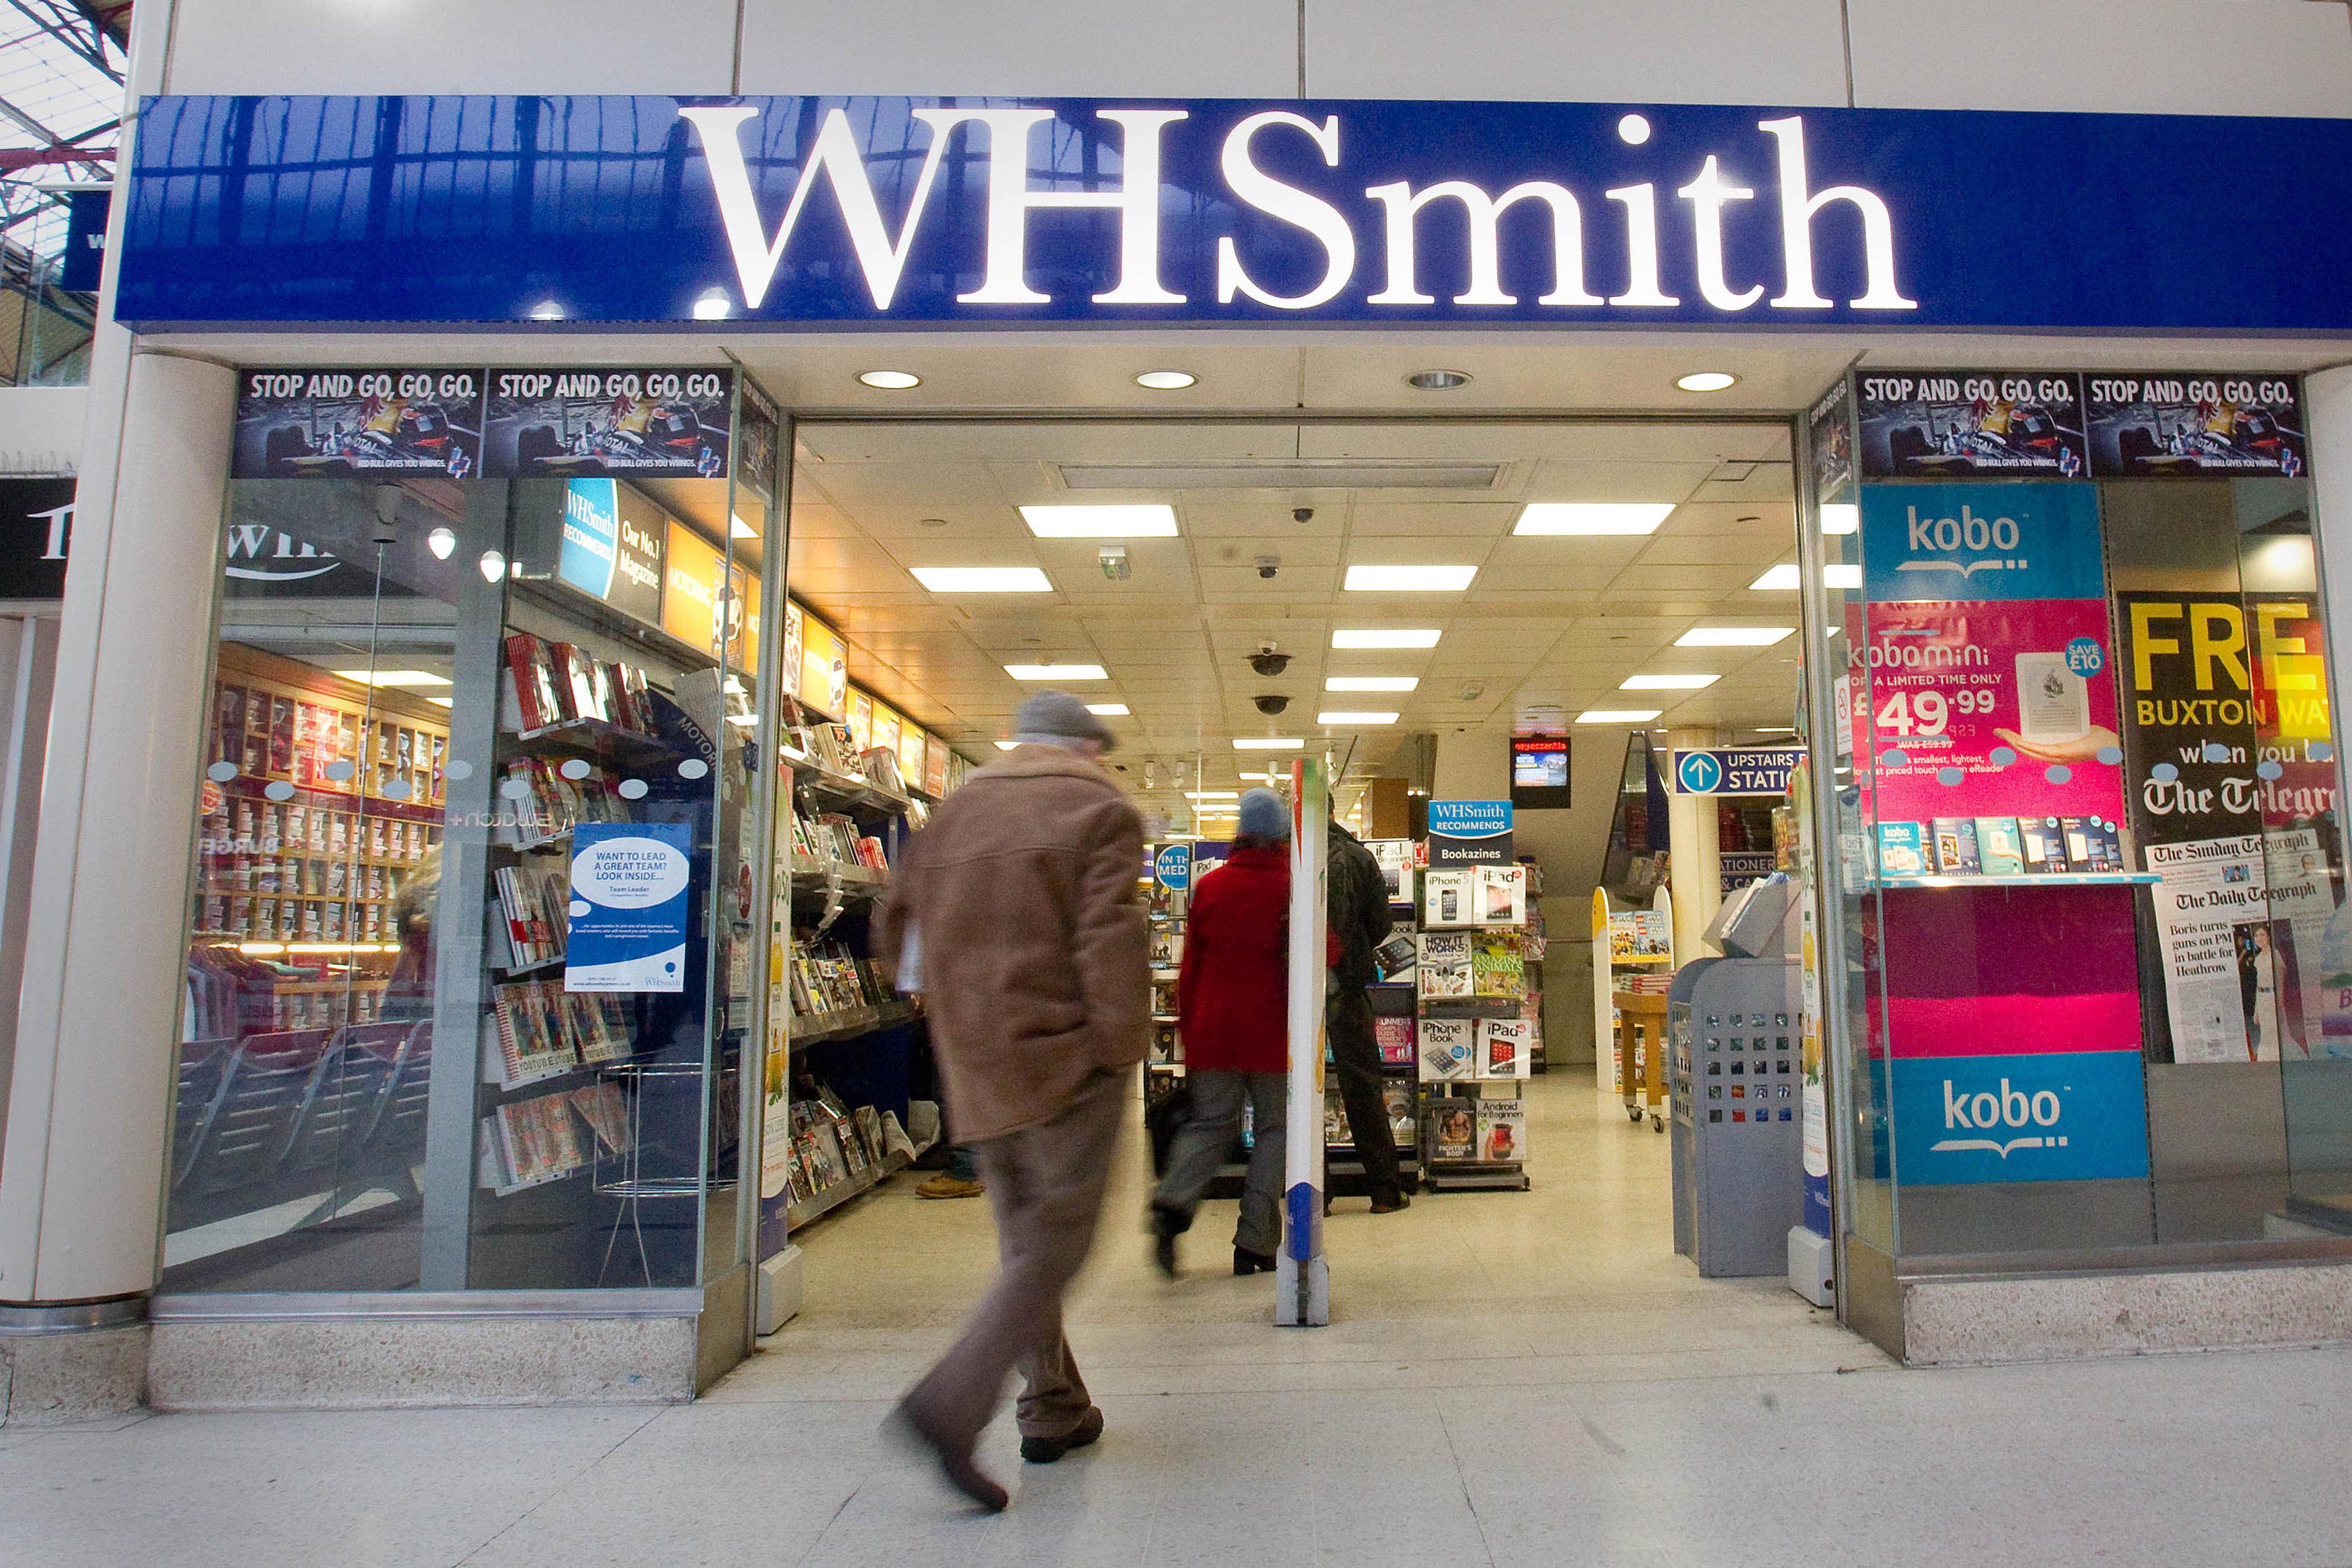 wh smith travel business